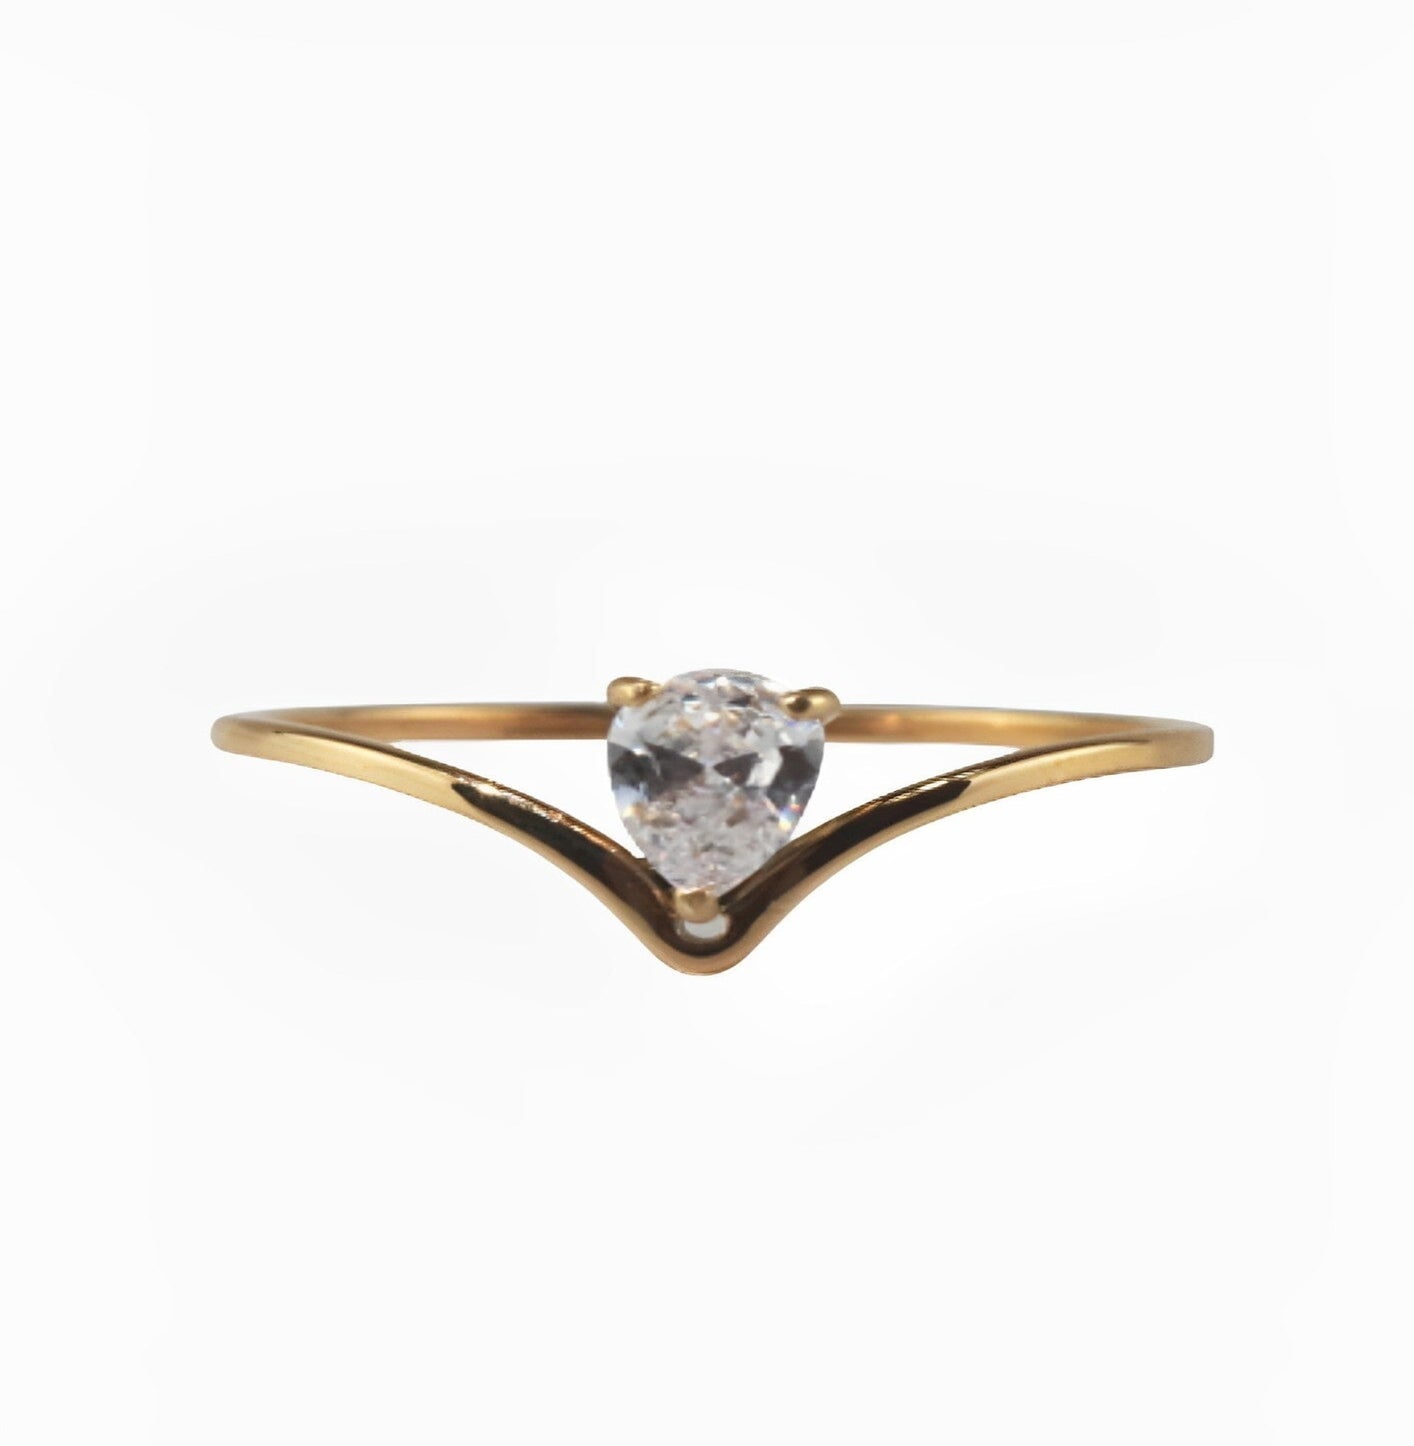 TEAR RING ring Yubama Jewelry Online Store - The Elegant Designs of Gold and Silver ! 